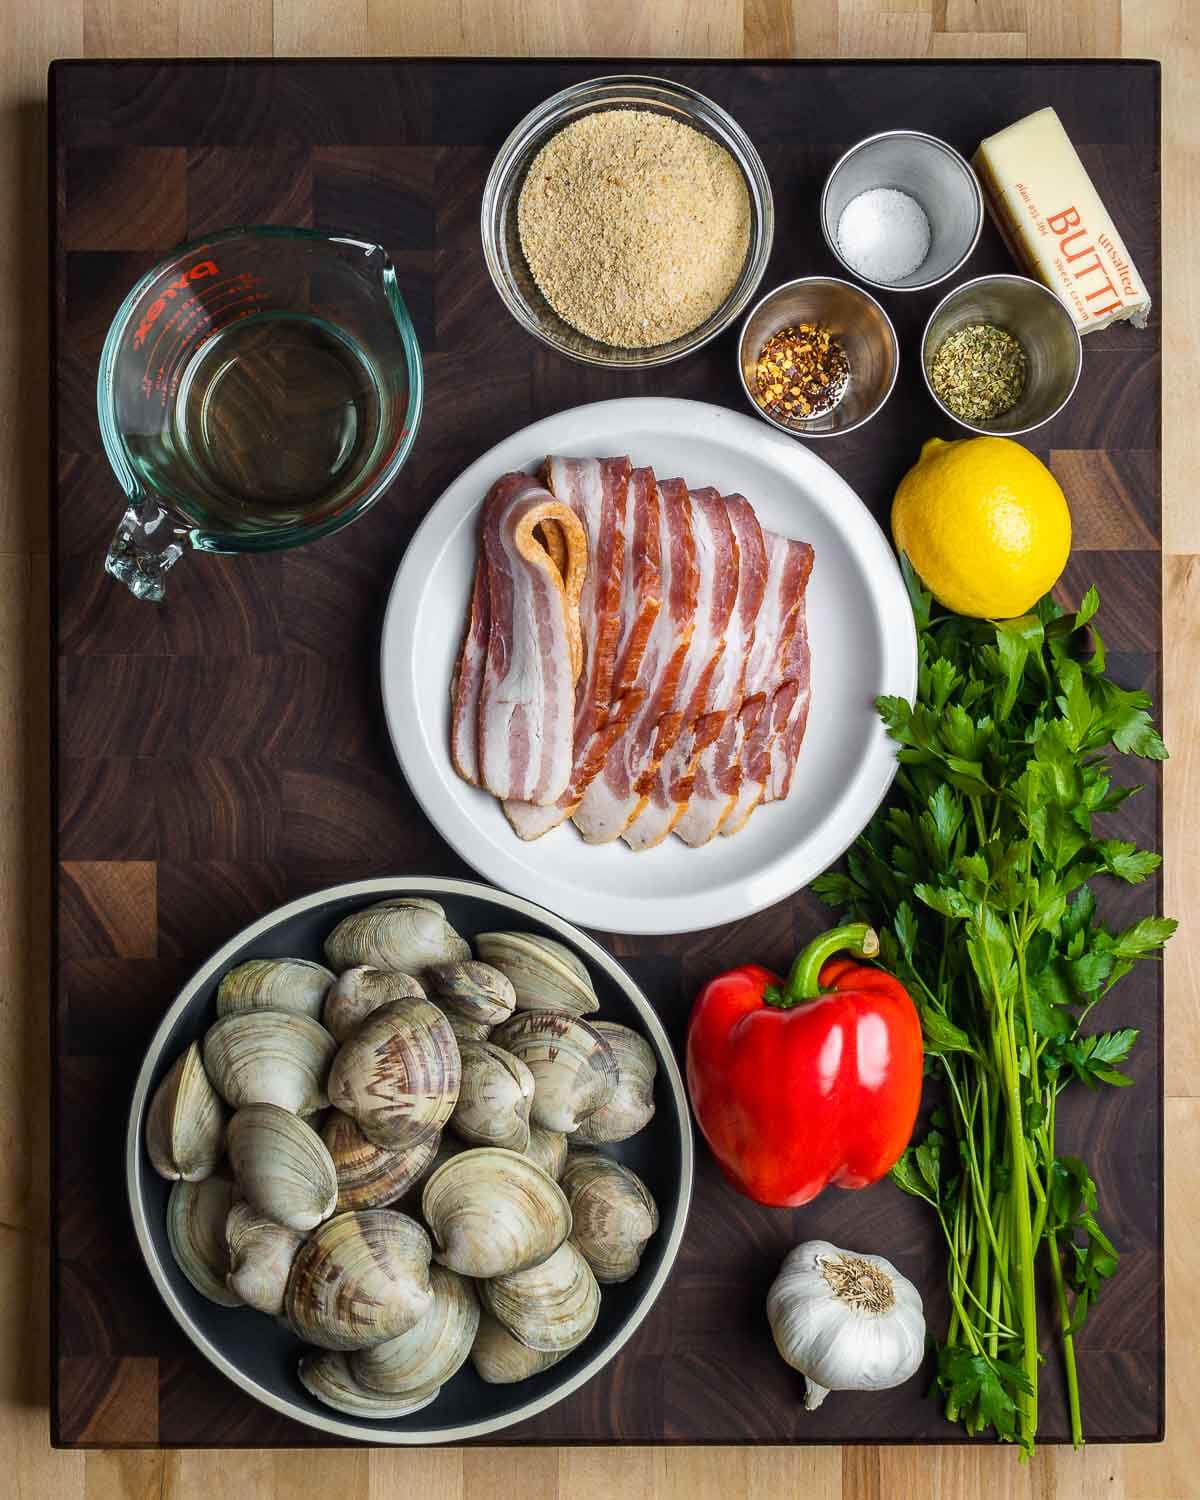 Ingredients shown: white wine, breadcrumbs, salt, chili flakes, oregano, butter, bacon, lemons, clams, bell pepper, garlic, and parsley.